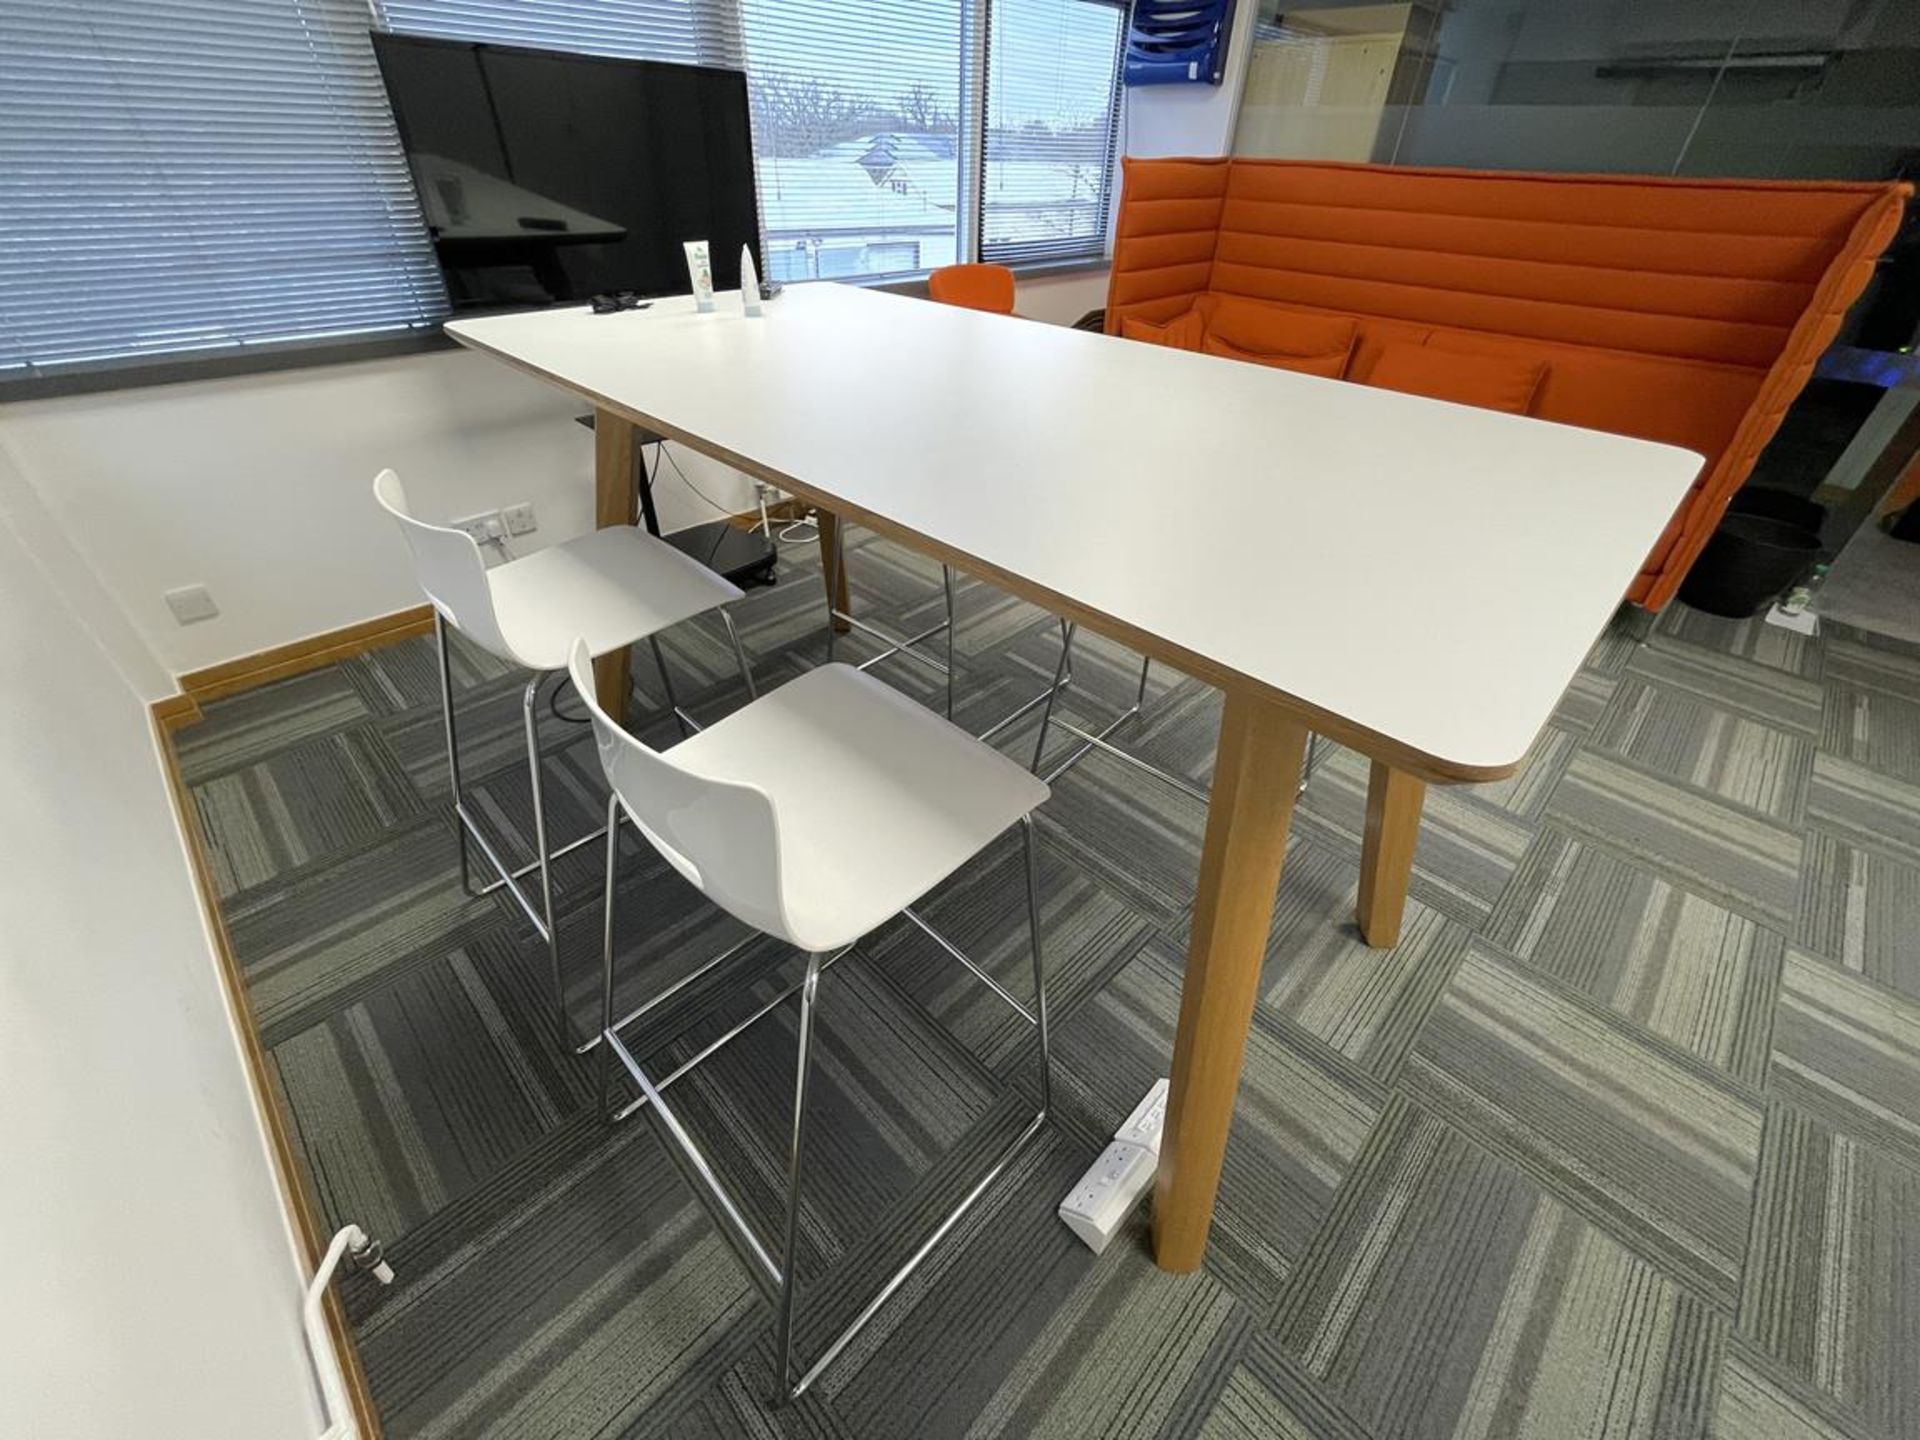 Furniture Contents of The Breakout Room to Include High Table to c.2M, 4x Allermuir Chrome Framed - Image 6 of 7